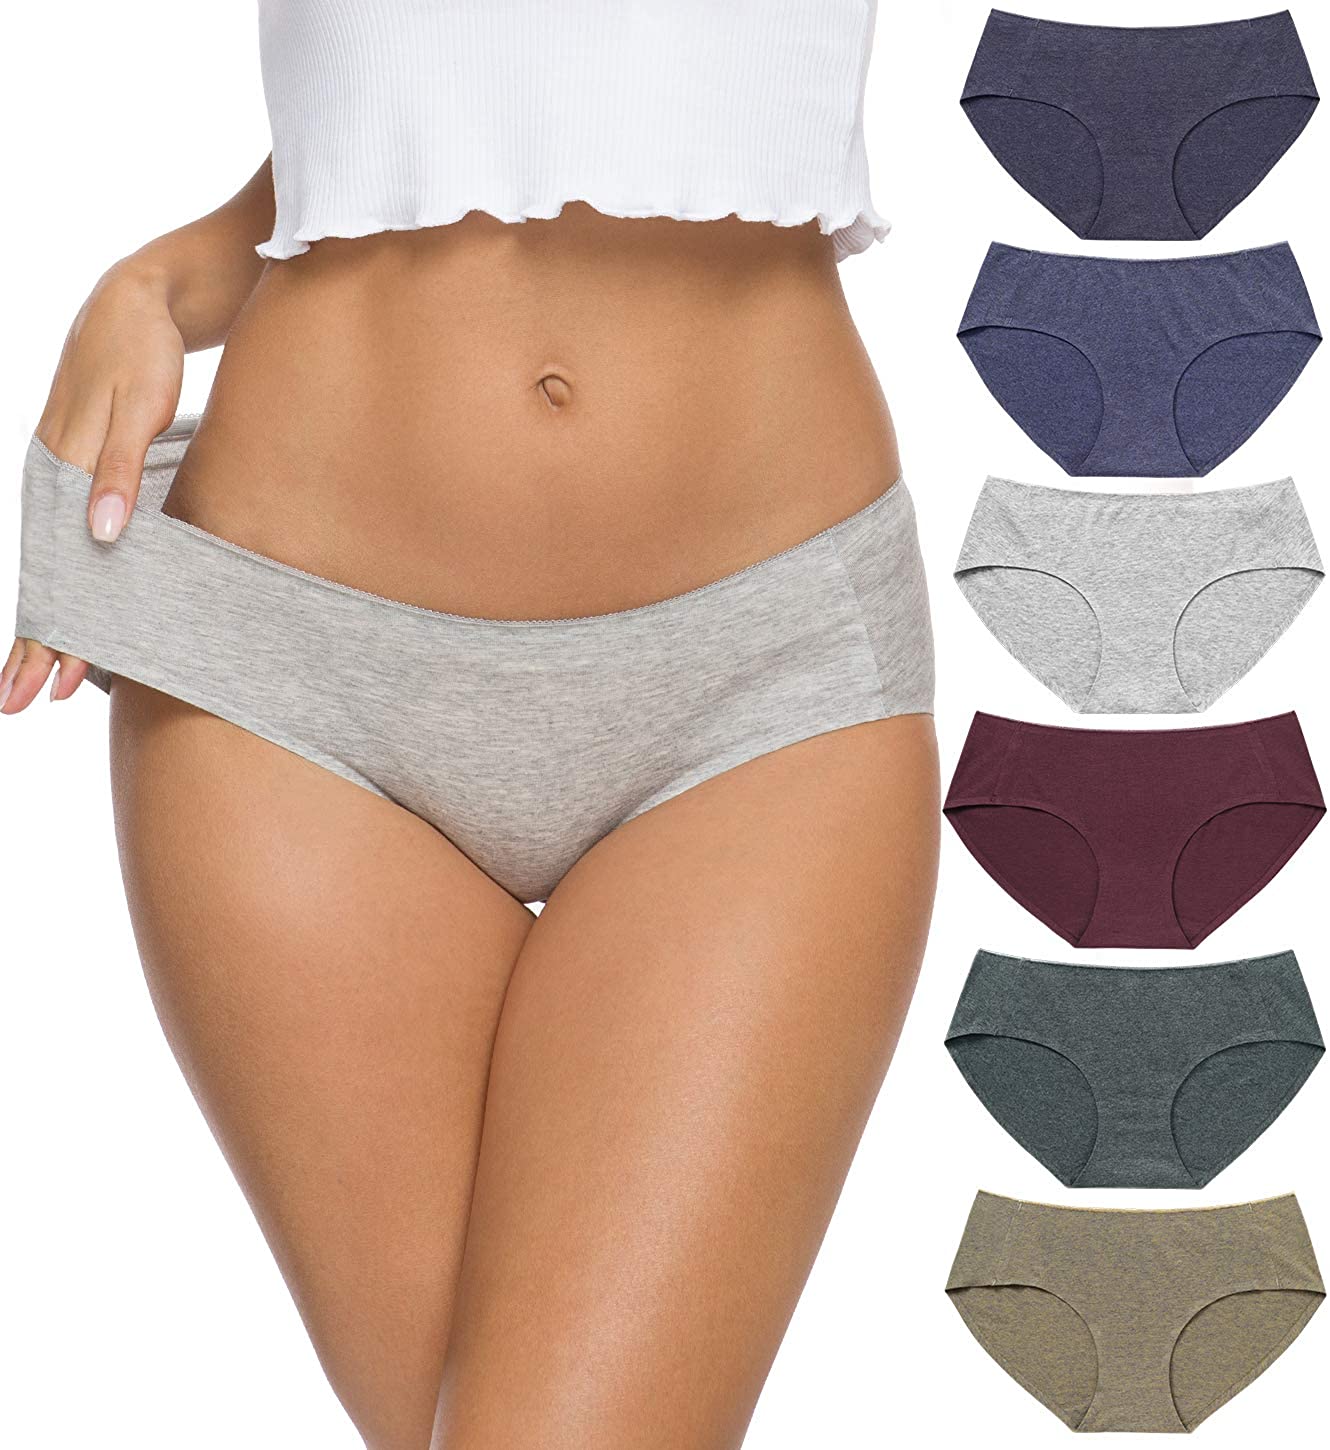  Wealurre Womens Cotton Thong Breathable Panties Low